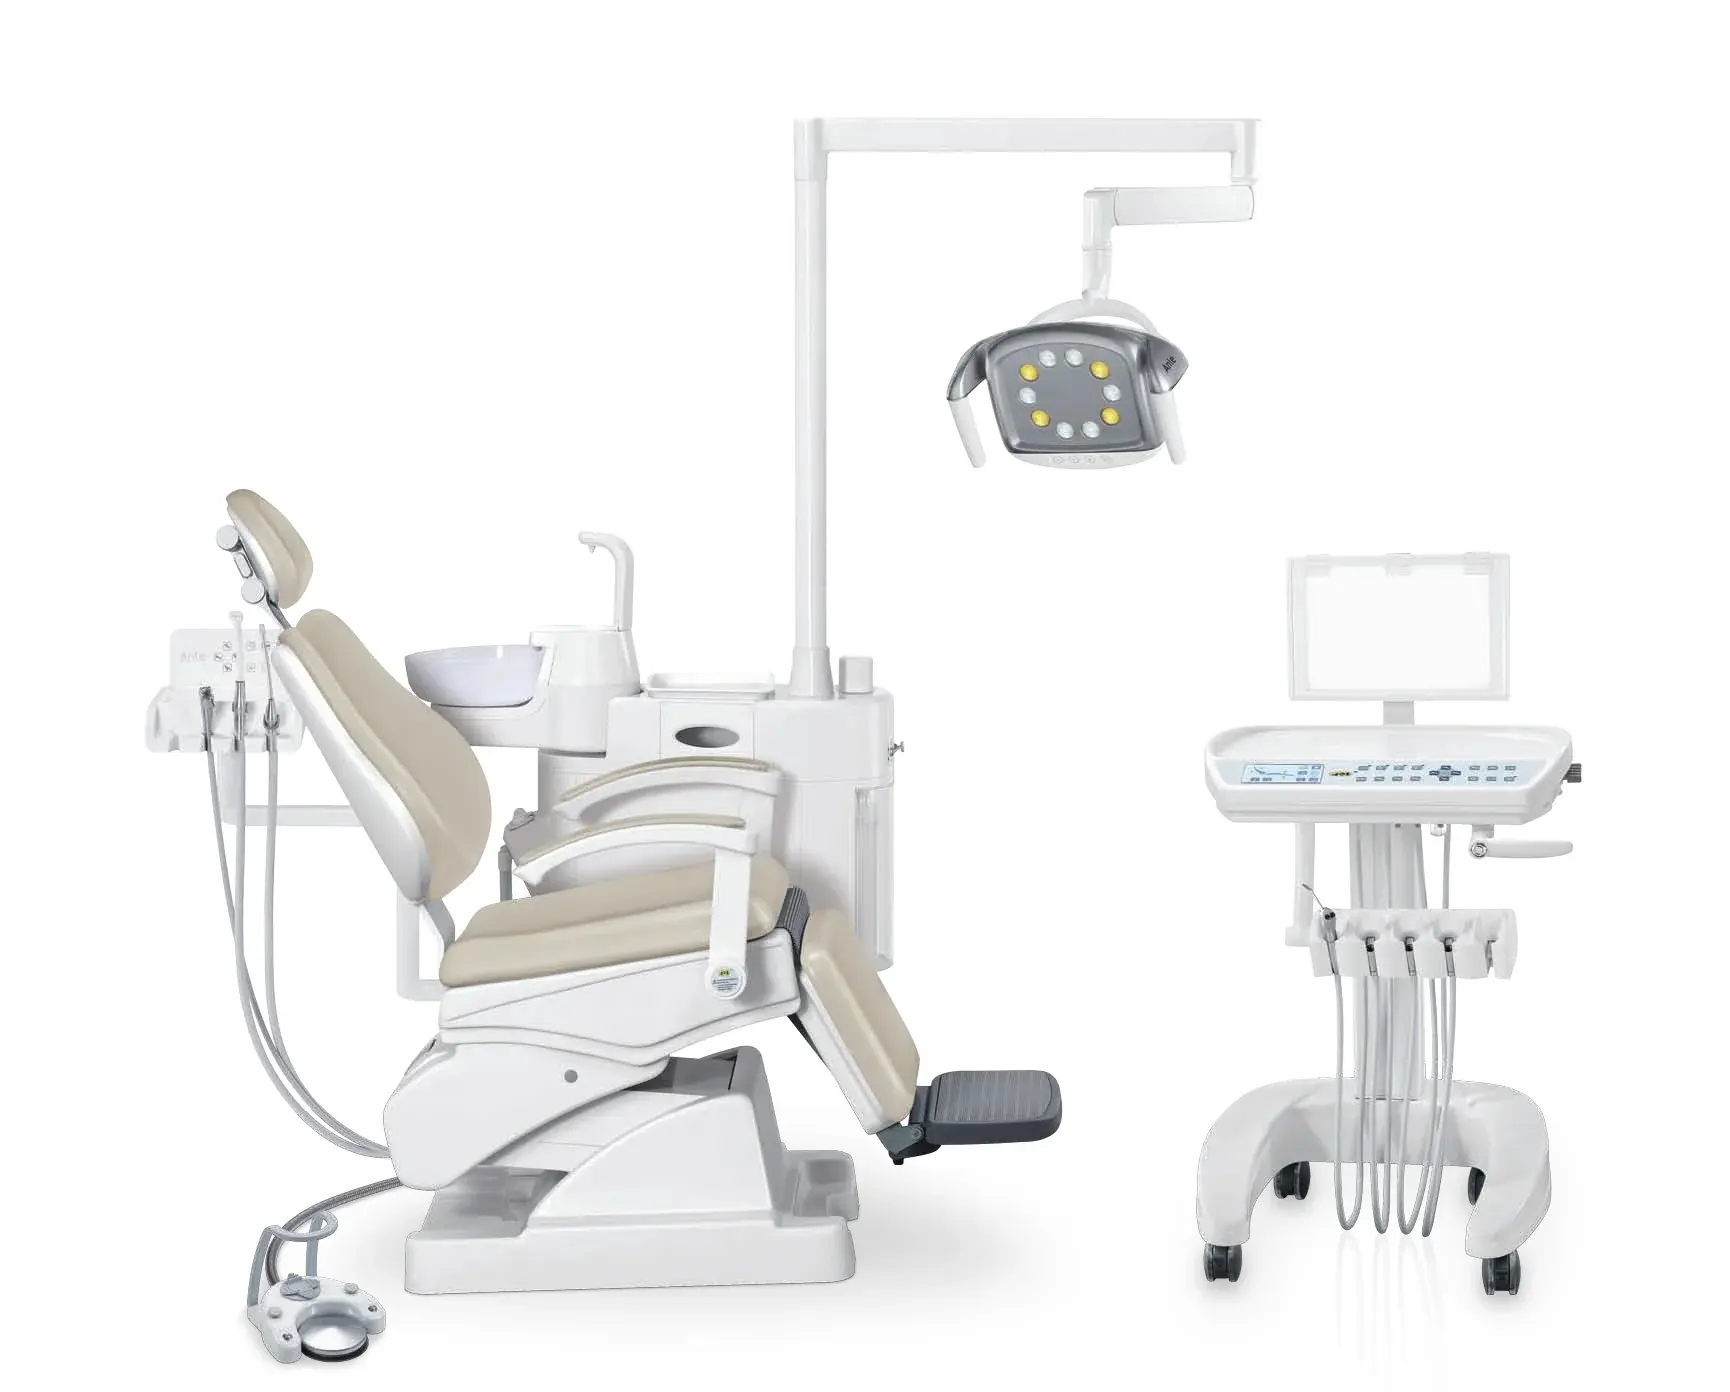 AM-398 Trolley Floor Type Foldaway Dental Unit with LED Lamp Suction Filter and Pneumatic Foot Switch Air Pressure